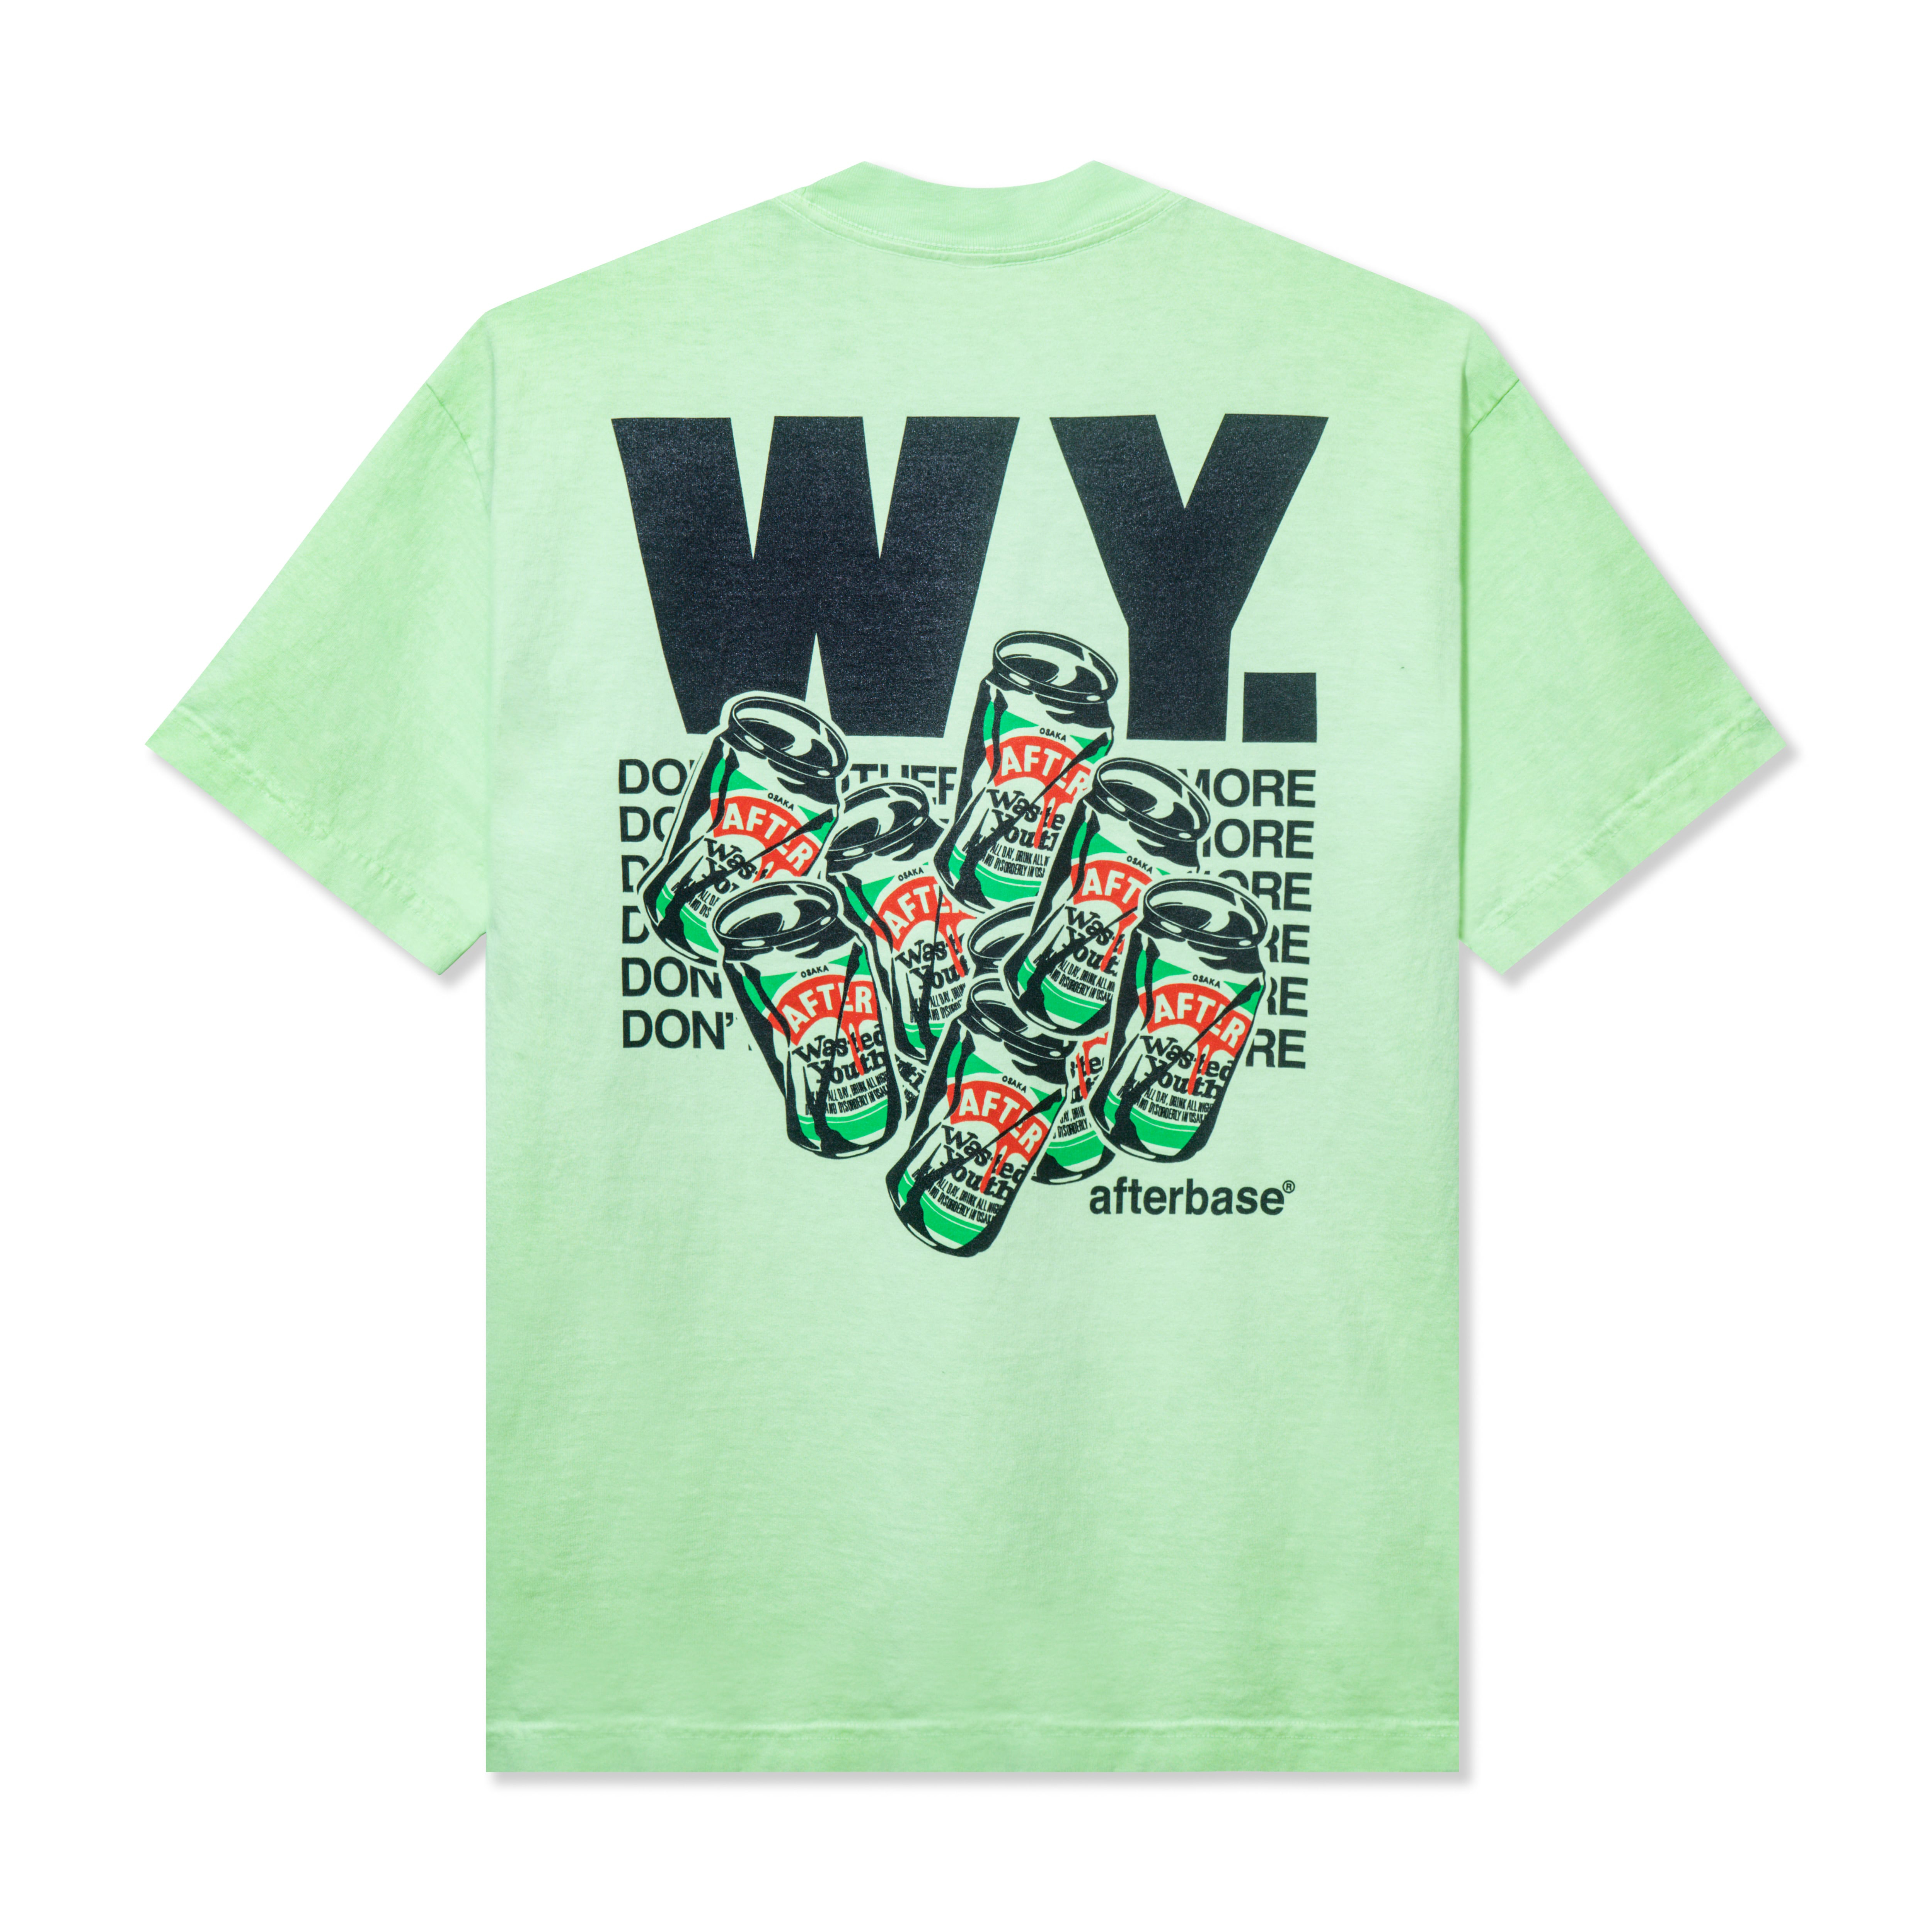 Wasted Youth x Afterbase S/S Tee Lime Green - SS22 Men's - US